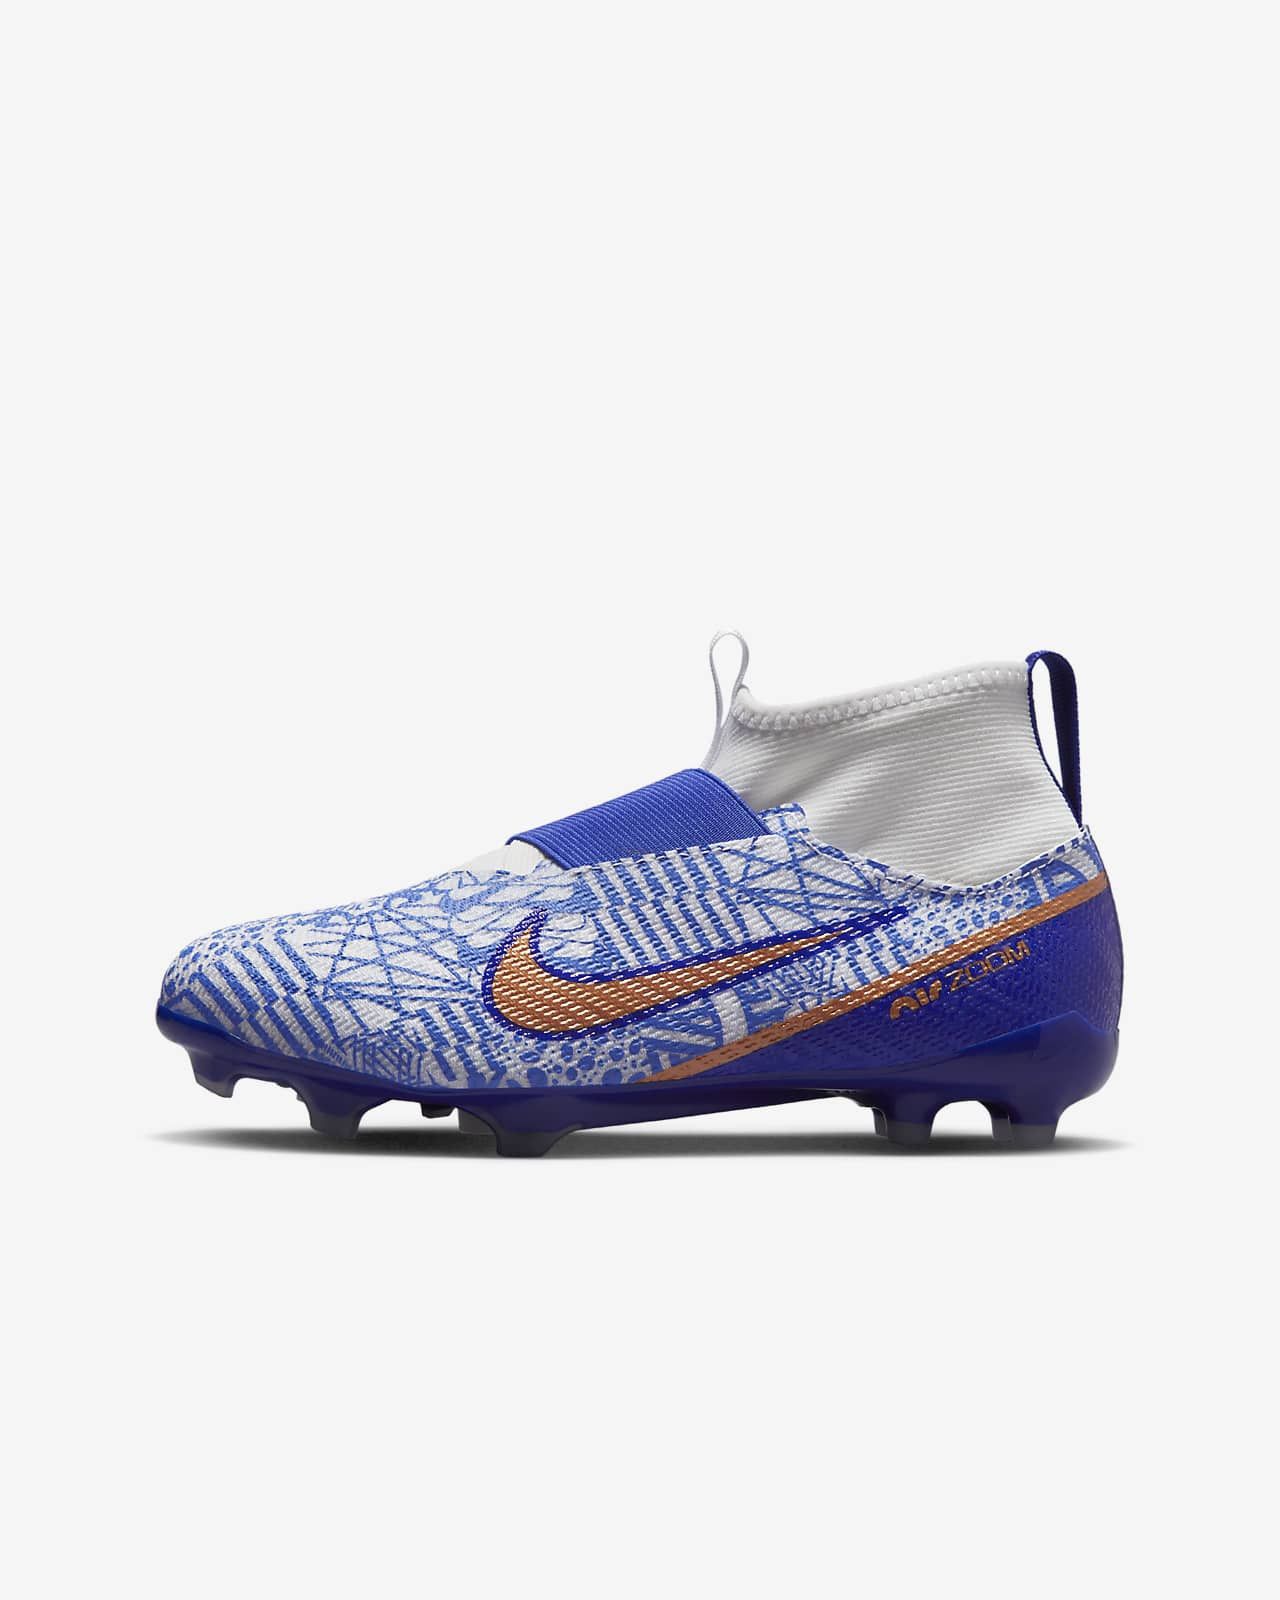 Little/Big Kids' Firm-Ground Soccer Cleats | Nike (US)